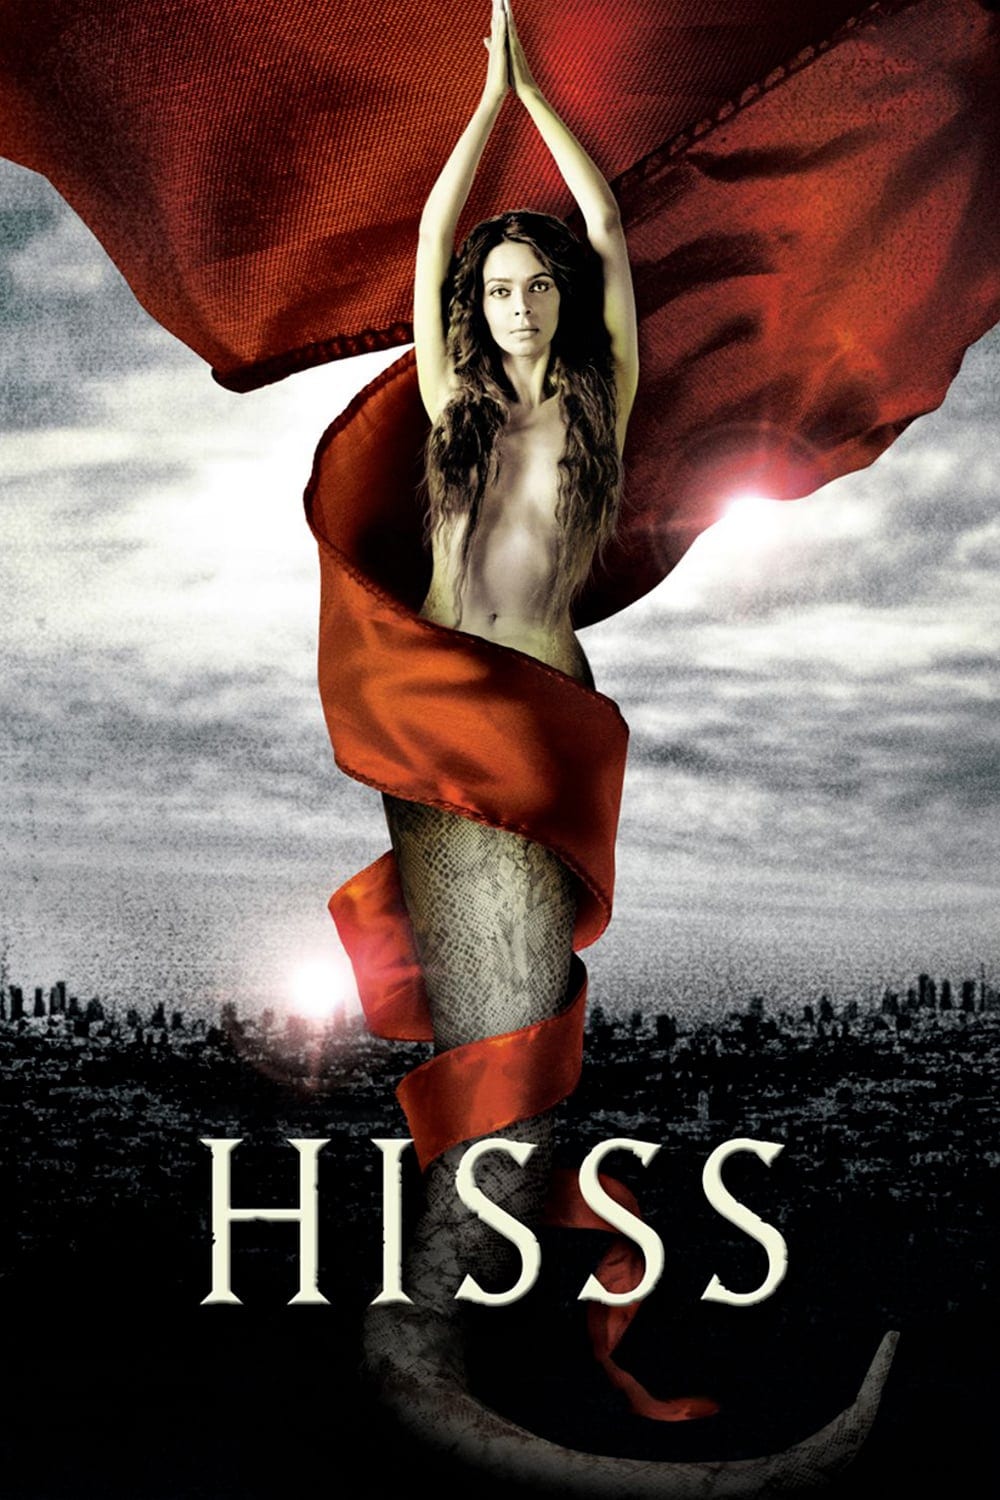 Poster for the movie "Hisss"